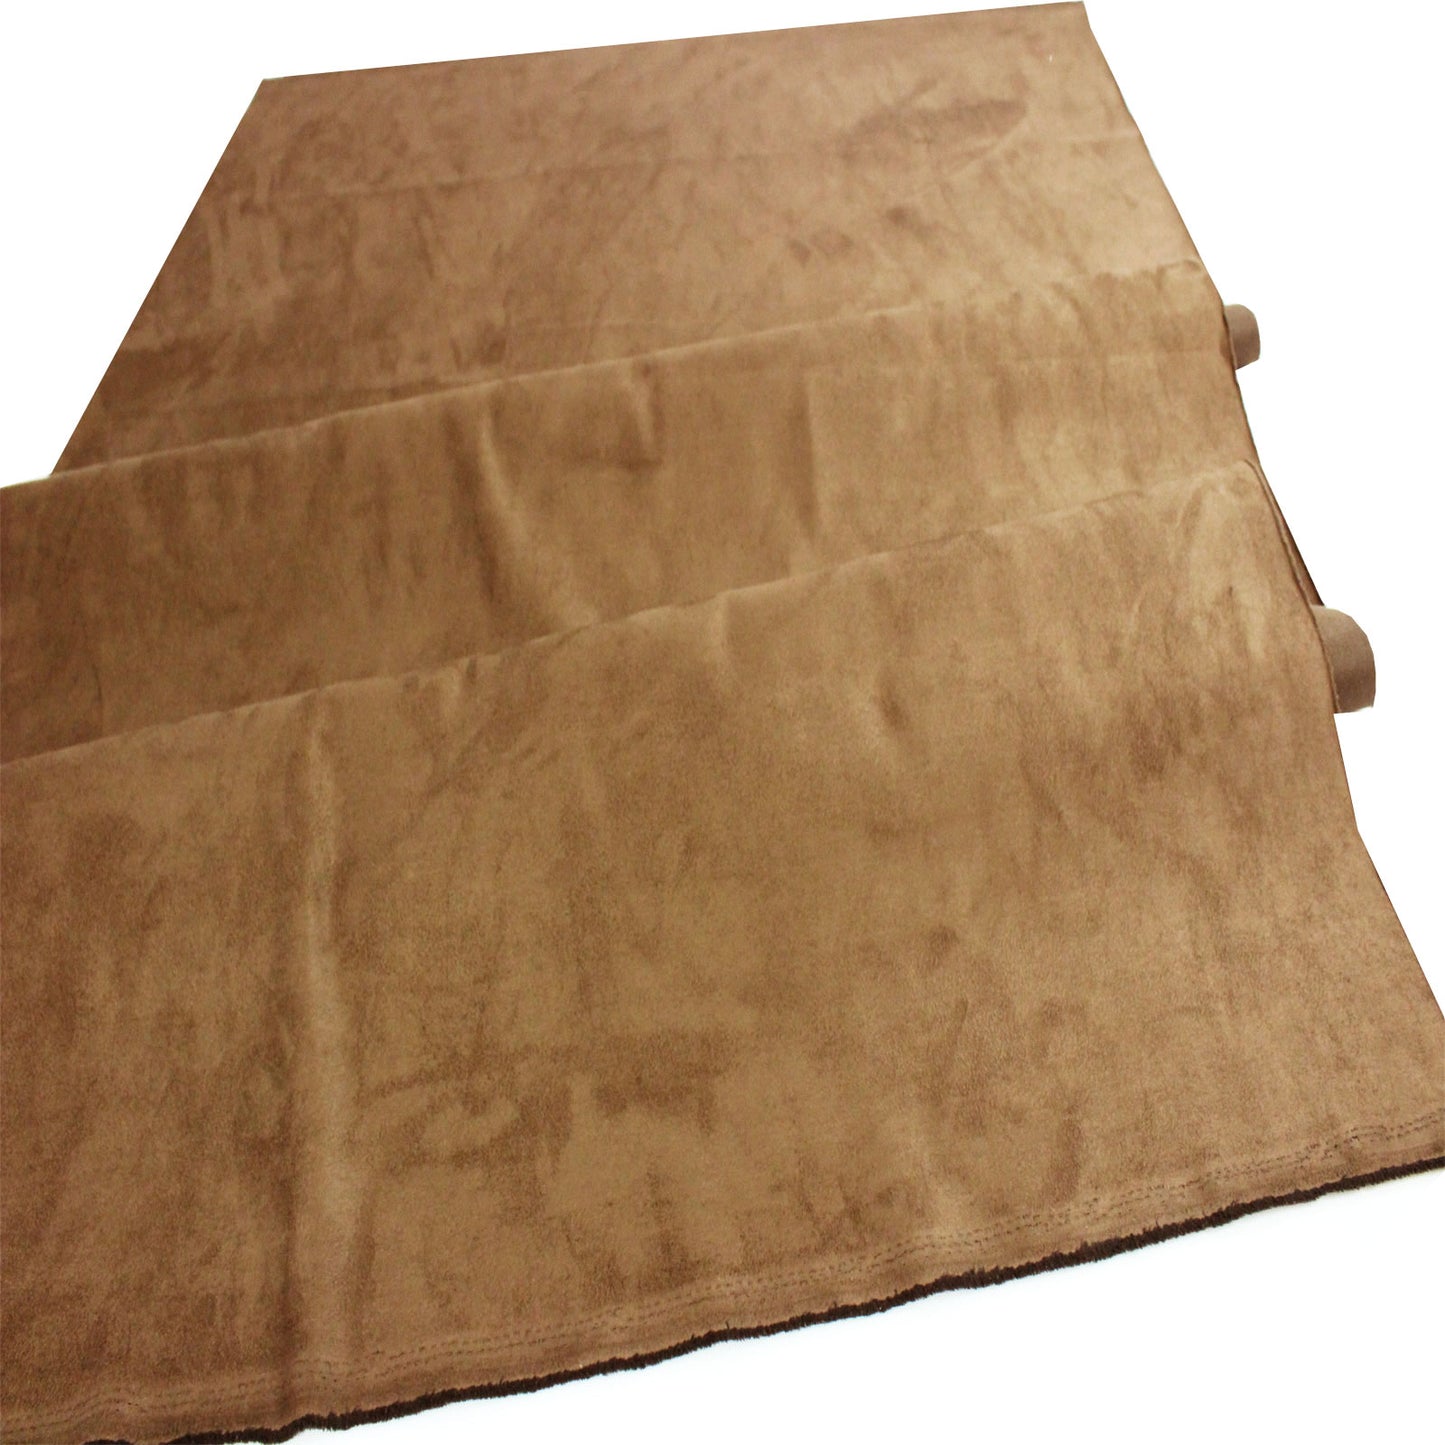 Mocha Suede Microsuede Fabric Upholstery Drapery Fabric by the yard